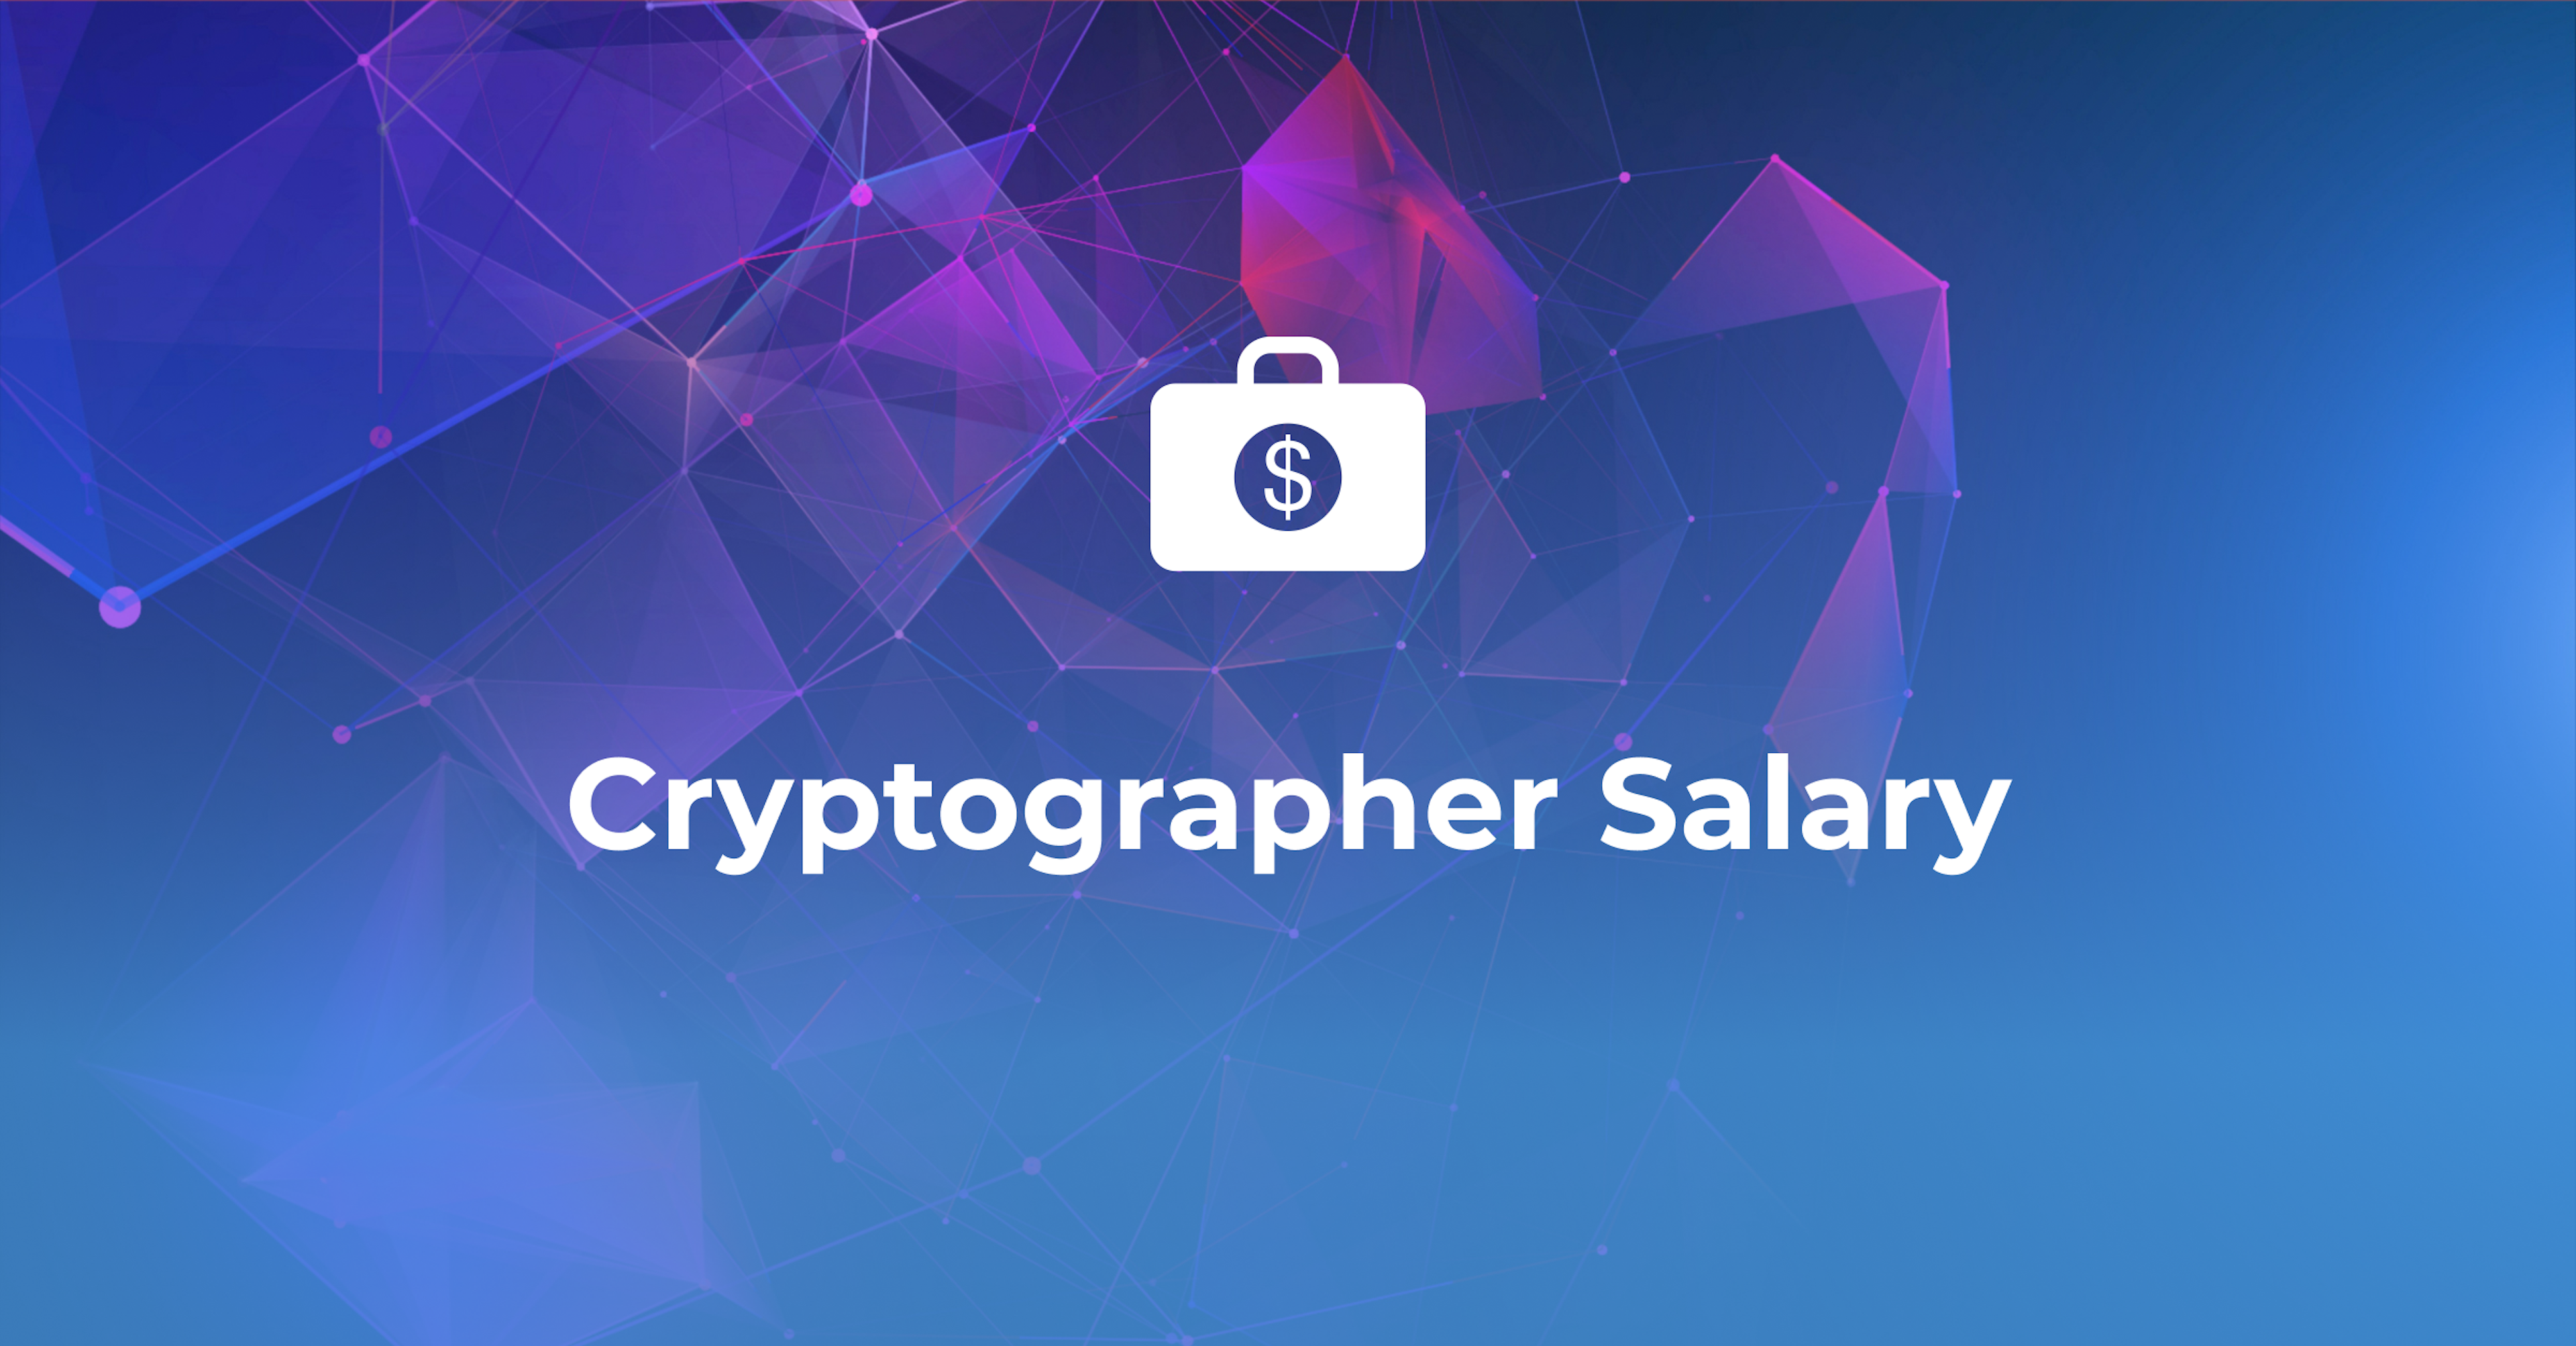 Cryptographer Salary | Everything You Need to Know About It